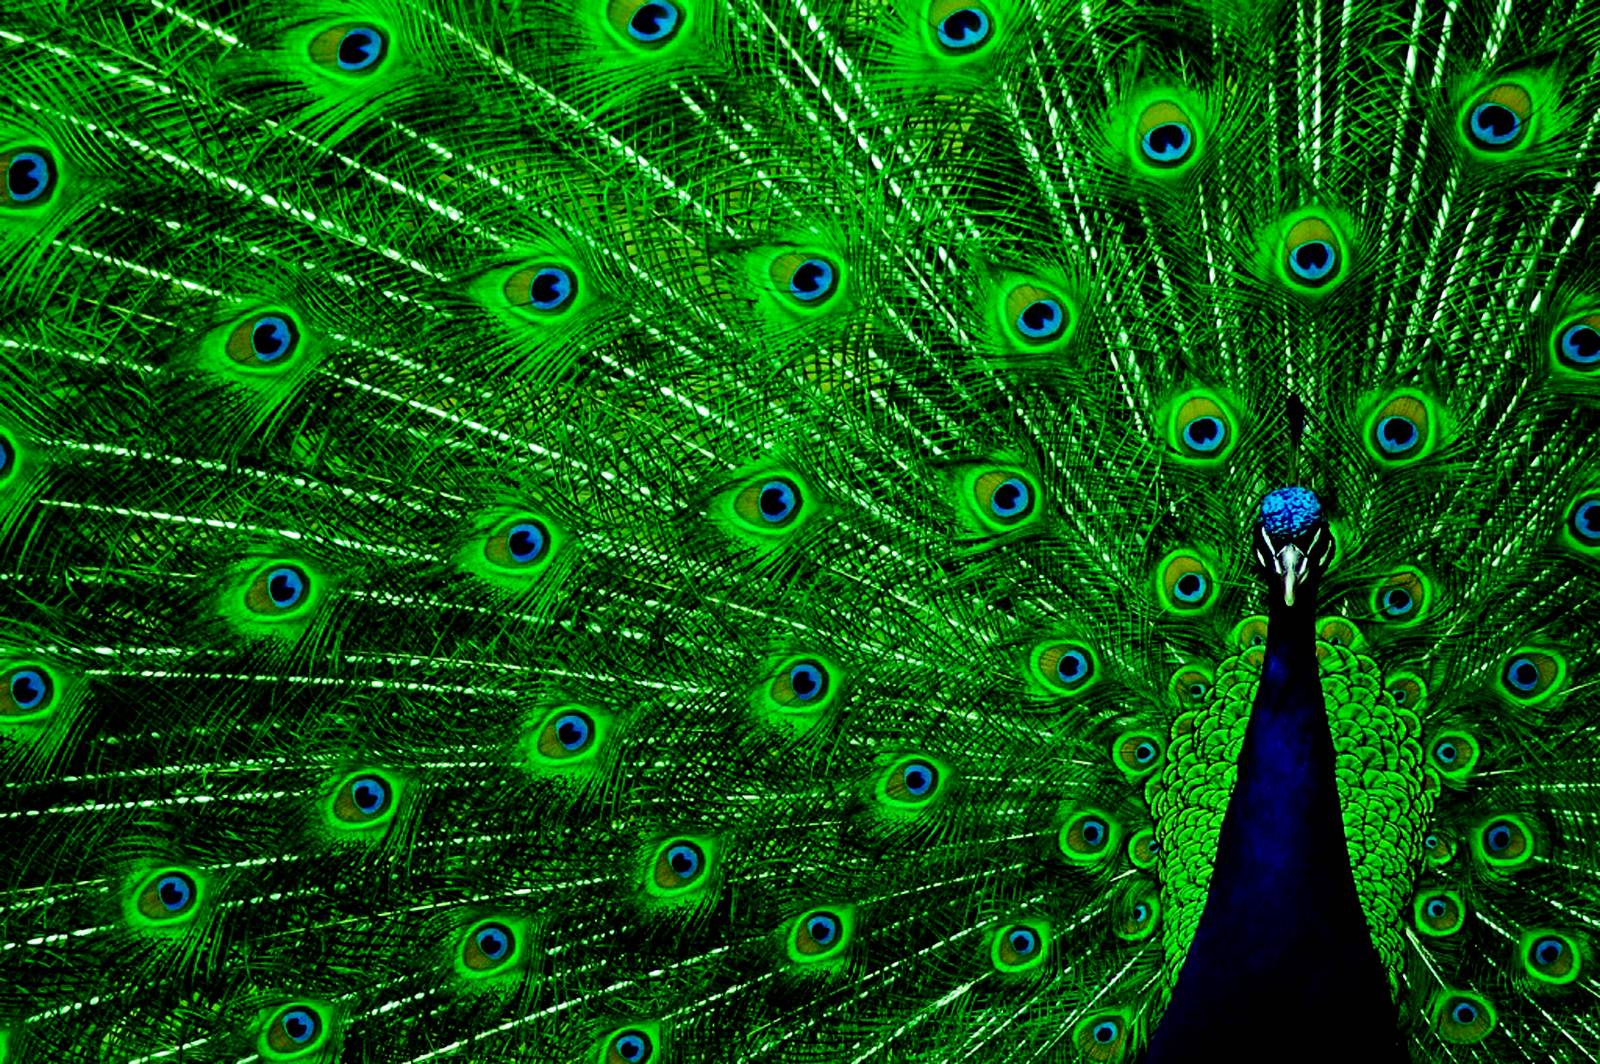 Peacock Wallpaper HD Android Application